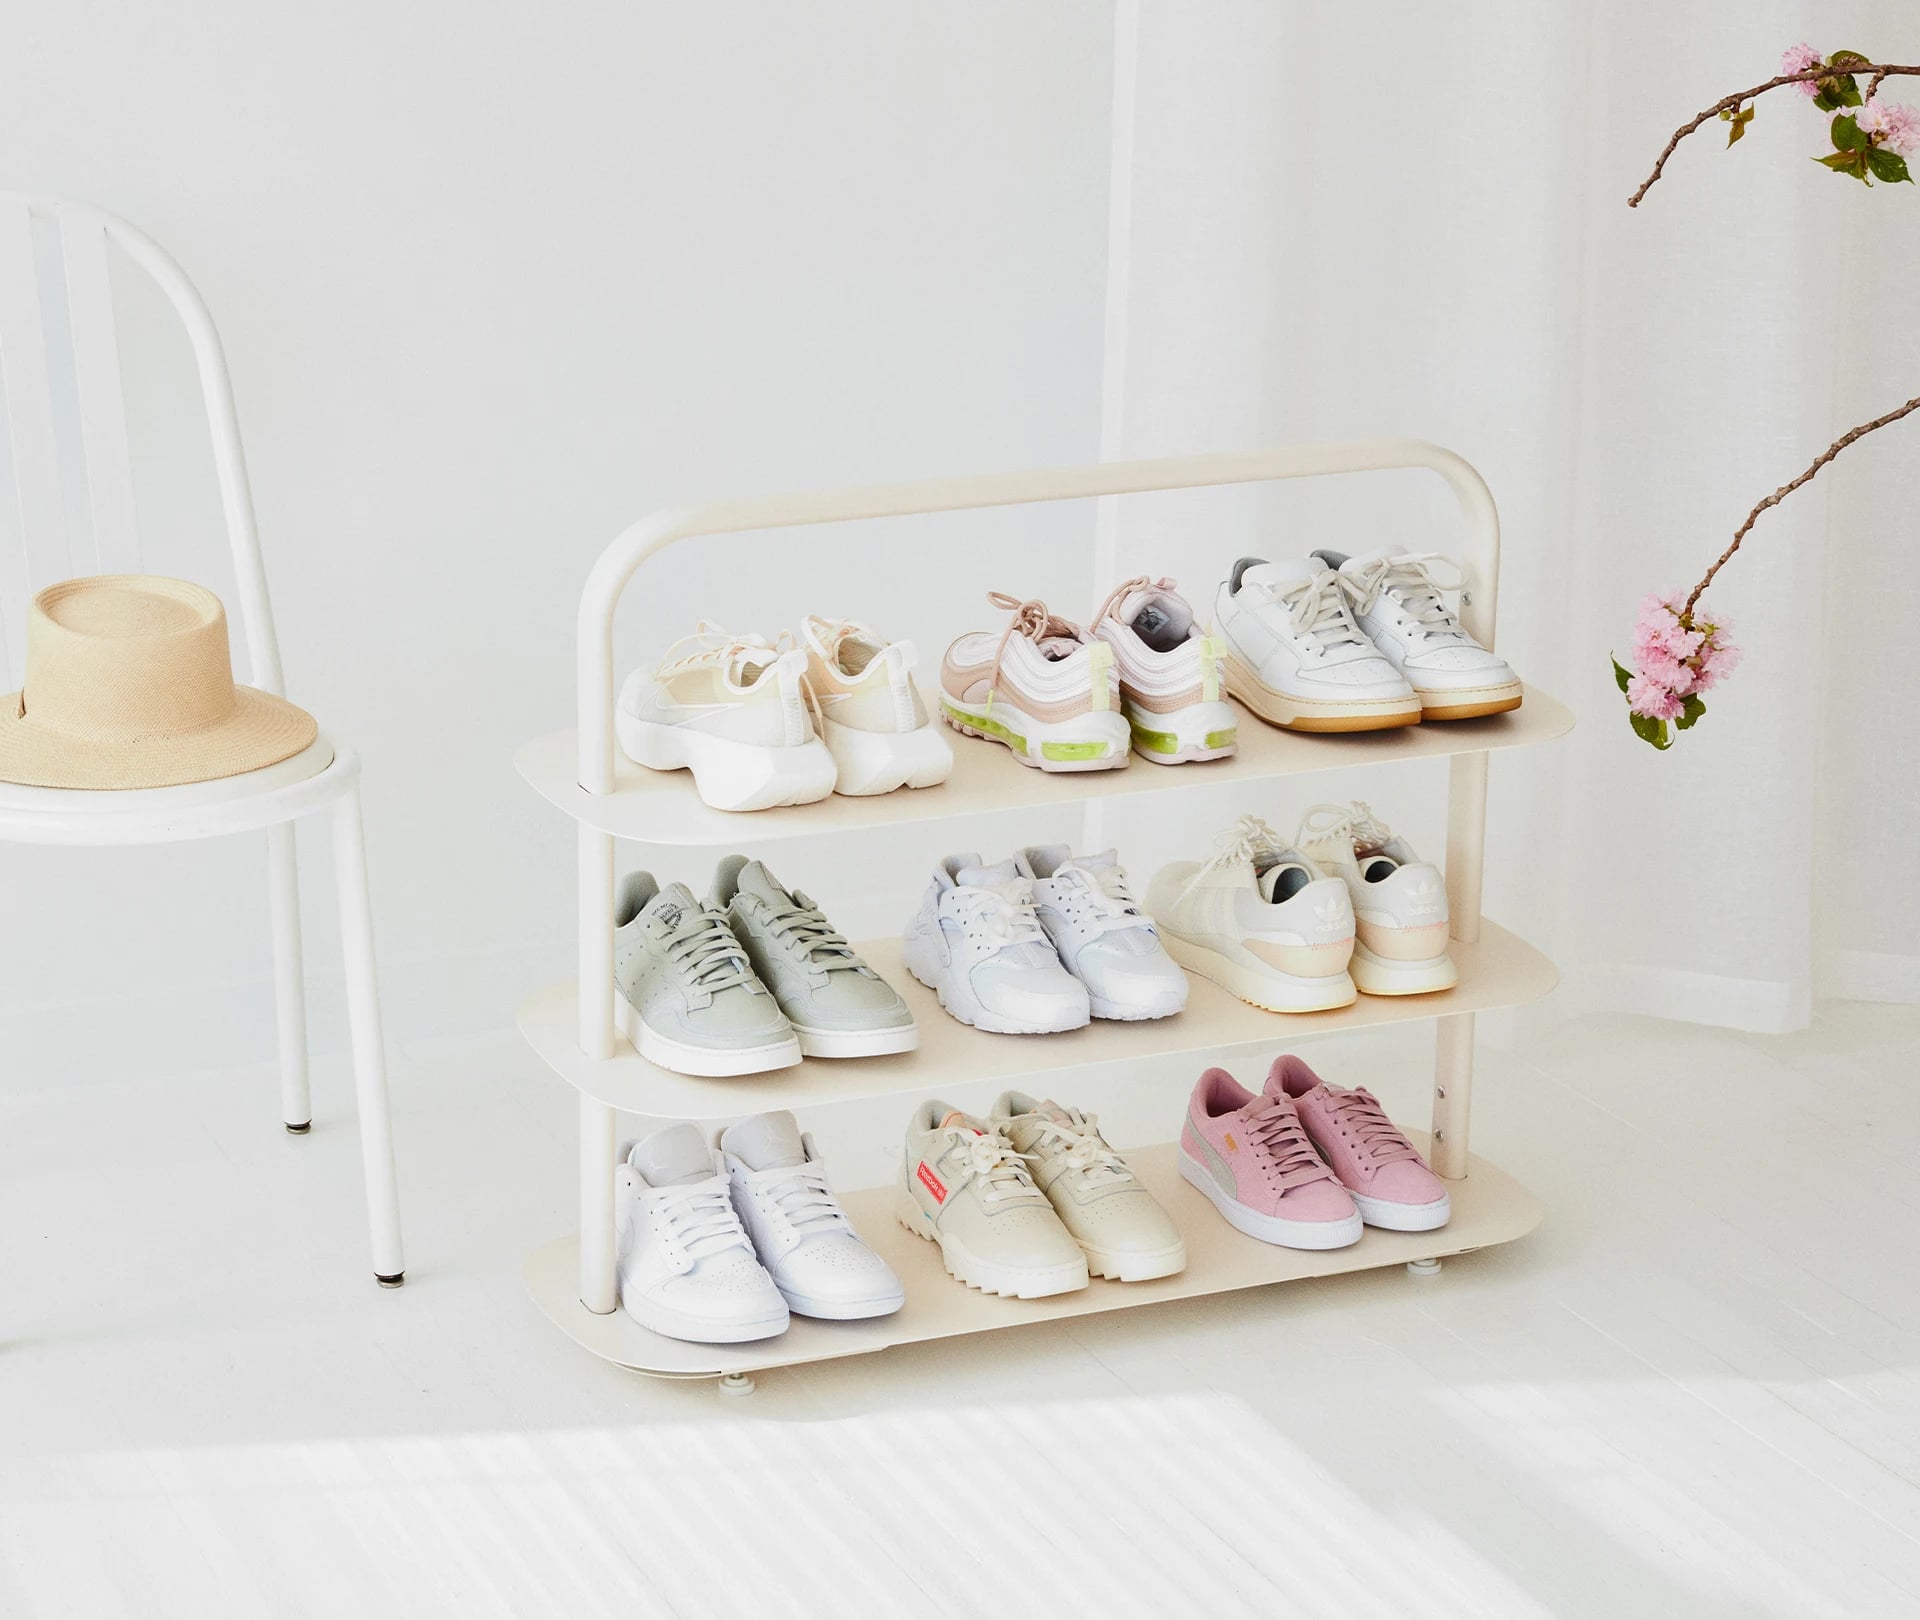 20 Shoe Racks Perfect for Setting in Small Spaces - Style at First Sight